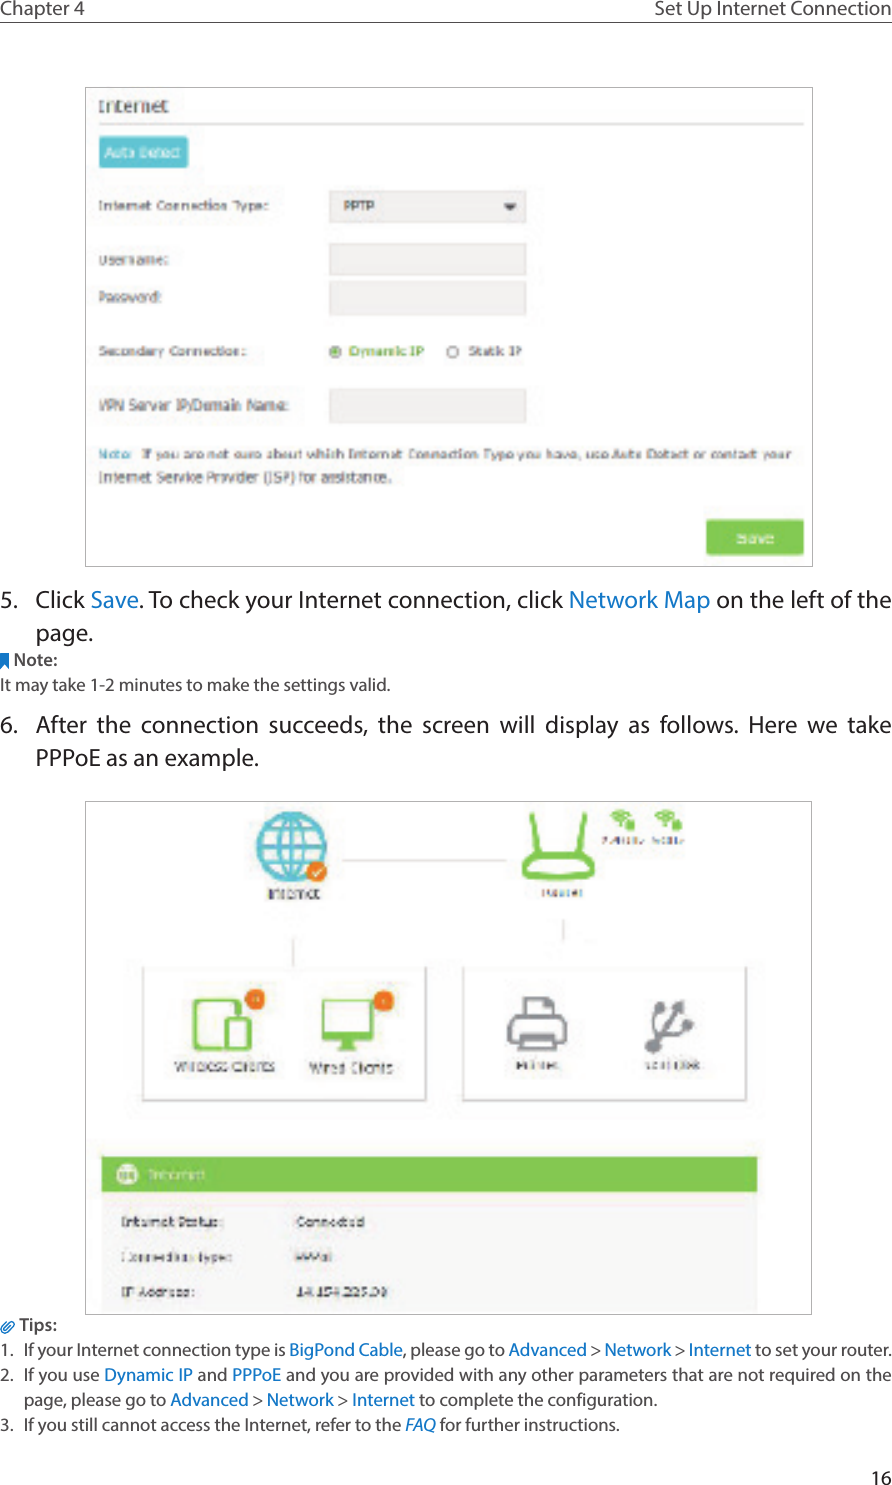 16Chapter 4 Set Up Internet Connection 5.  Click Save. To check your Internet connection, click Network Map on the left of the page.Note: It may take 1-2 minutes to make the settings valid.6.  After the connection succeeds, the screen will display as follows. Here we take PPPoE as an example. Tips: 1.  If your Internet connection type is BigPond Cable, please go to Advanced &gt; Network &gt; Internet to set your router.2.  If you use Dynamic IP and PPPoE and you are provided with any other parameters that are not required on the page, please go to Advanced &gt; Network &gt; Internet to complete the configuration.3.  If you still cannot access the Internet, refer to the FAQ for further instructions.